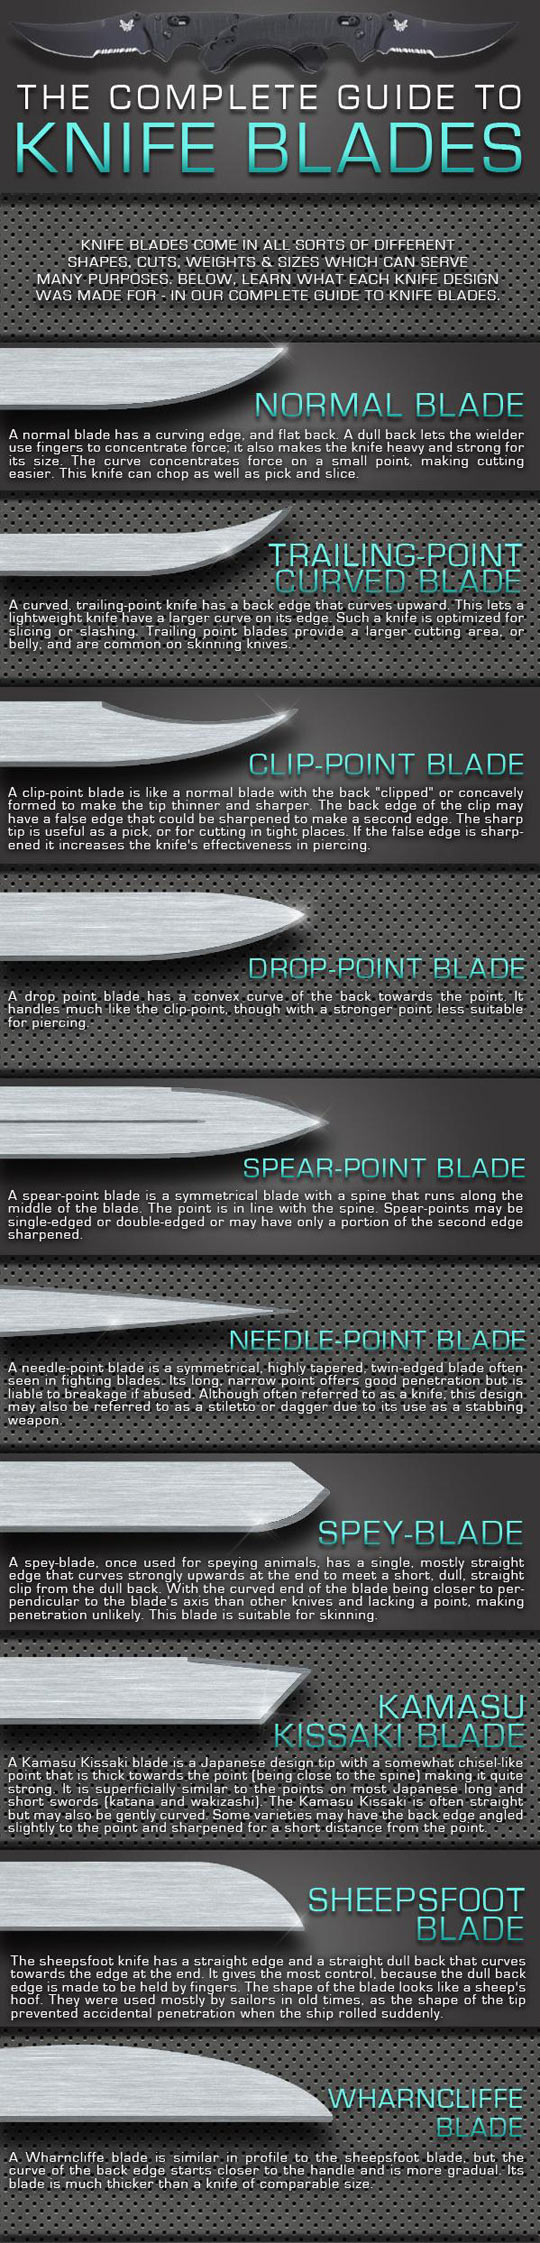 The (mostly) complete guide to knife blades.